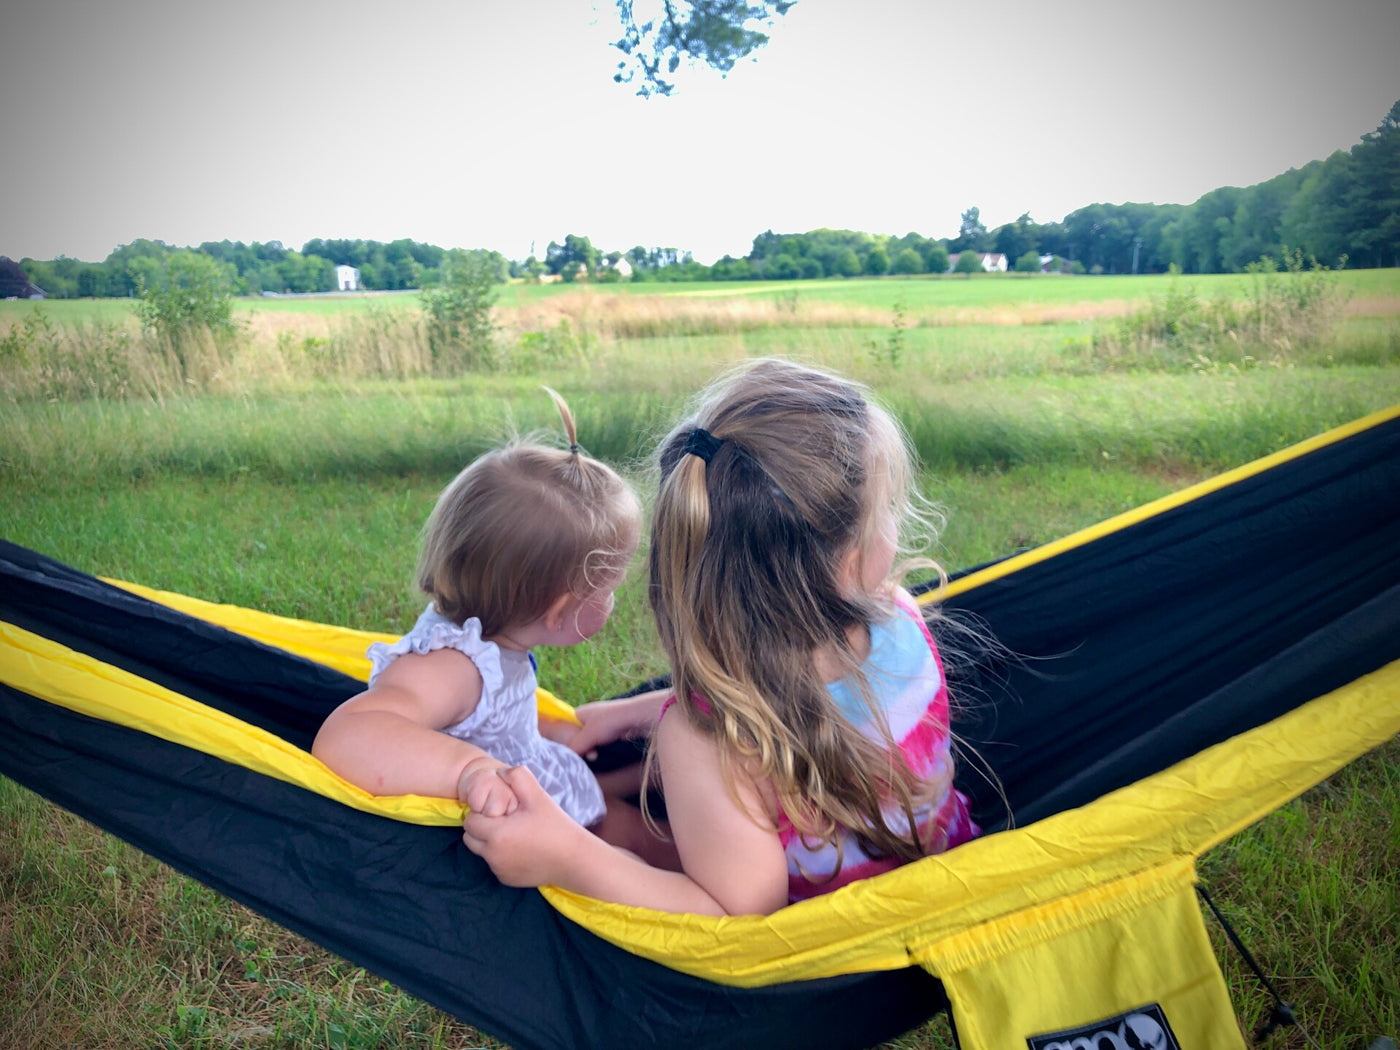 Two young girls sit in a hammock together and look out at a field.